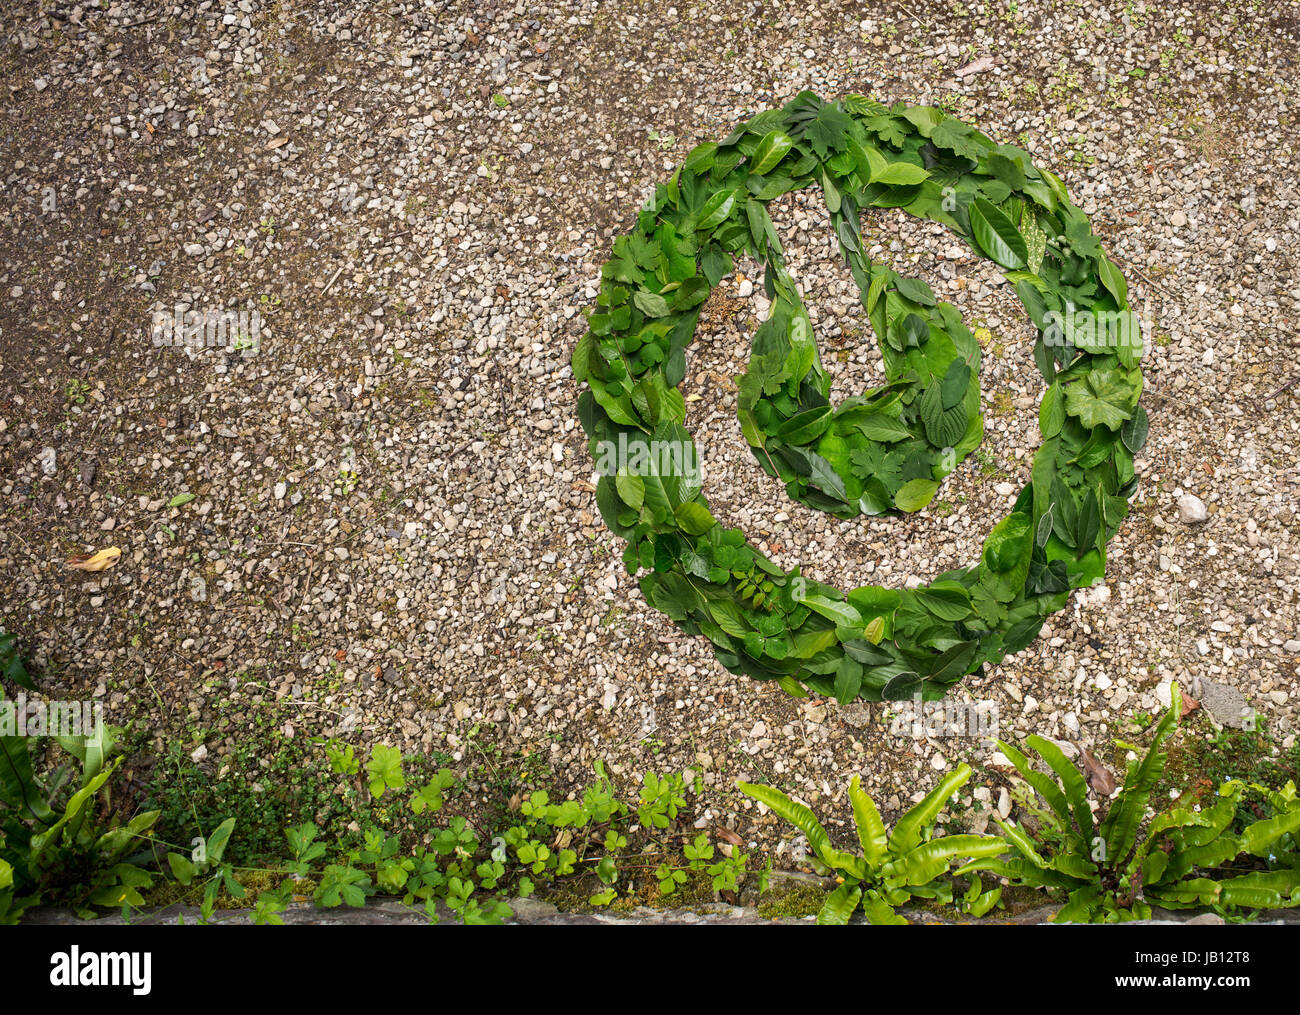 power symbol made from green leaves Stock Photo